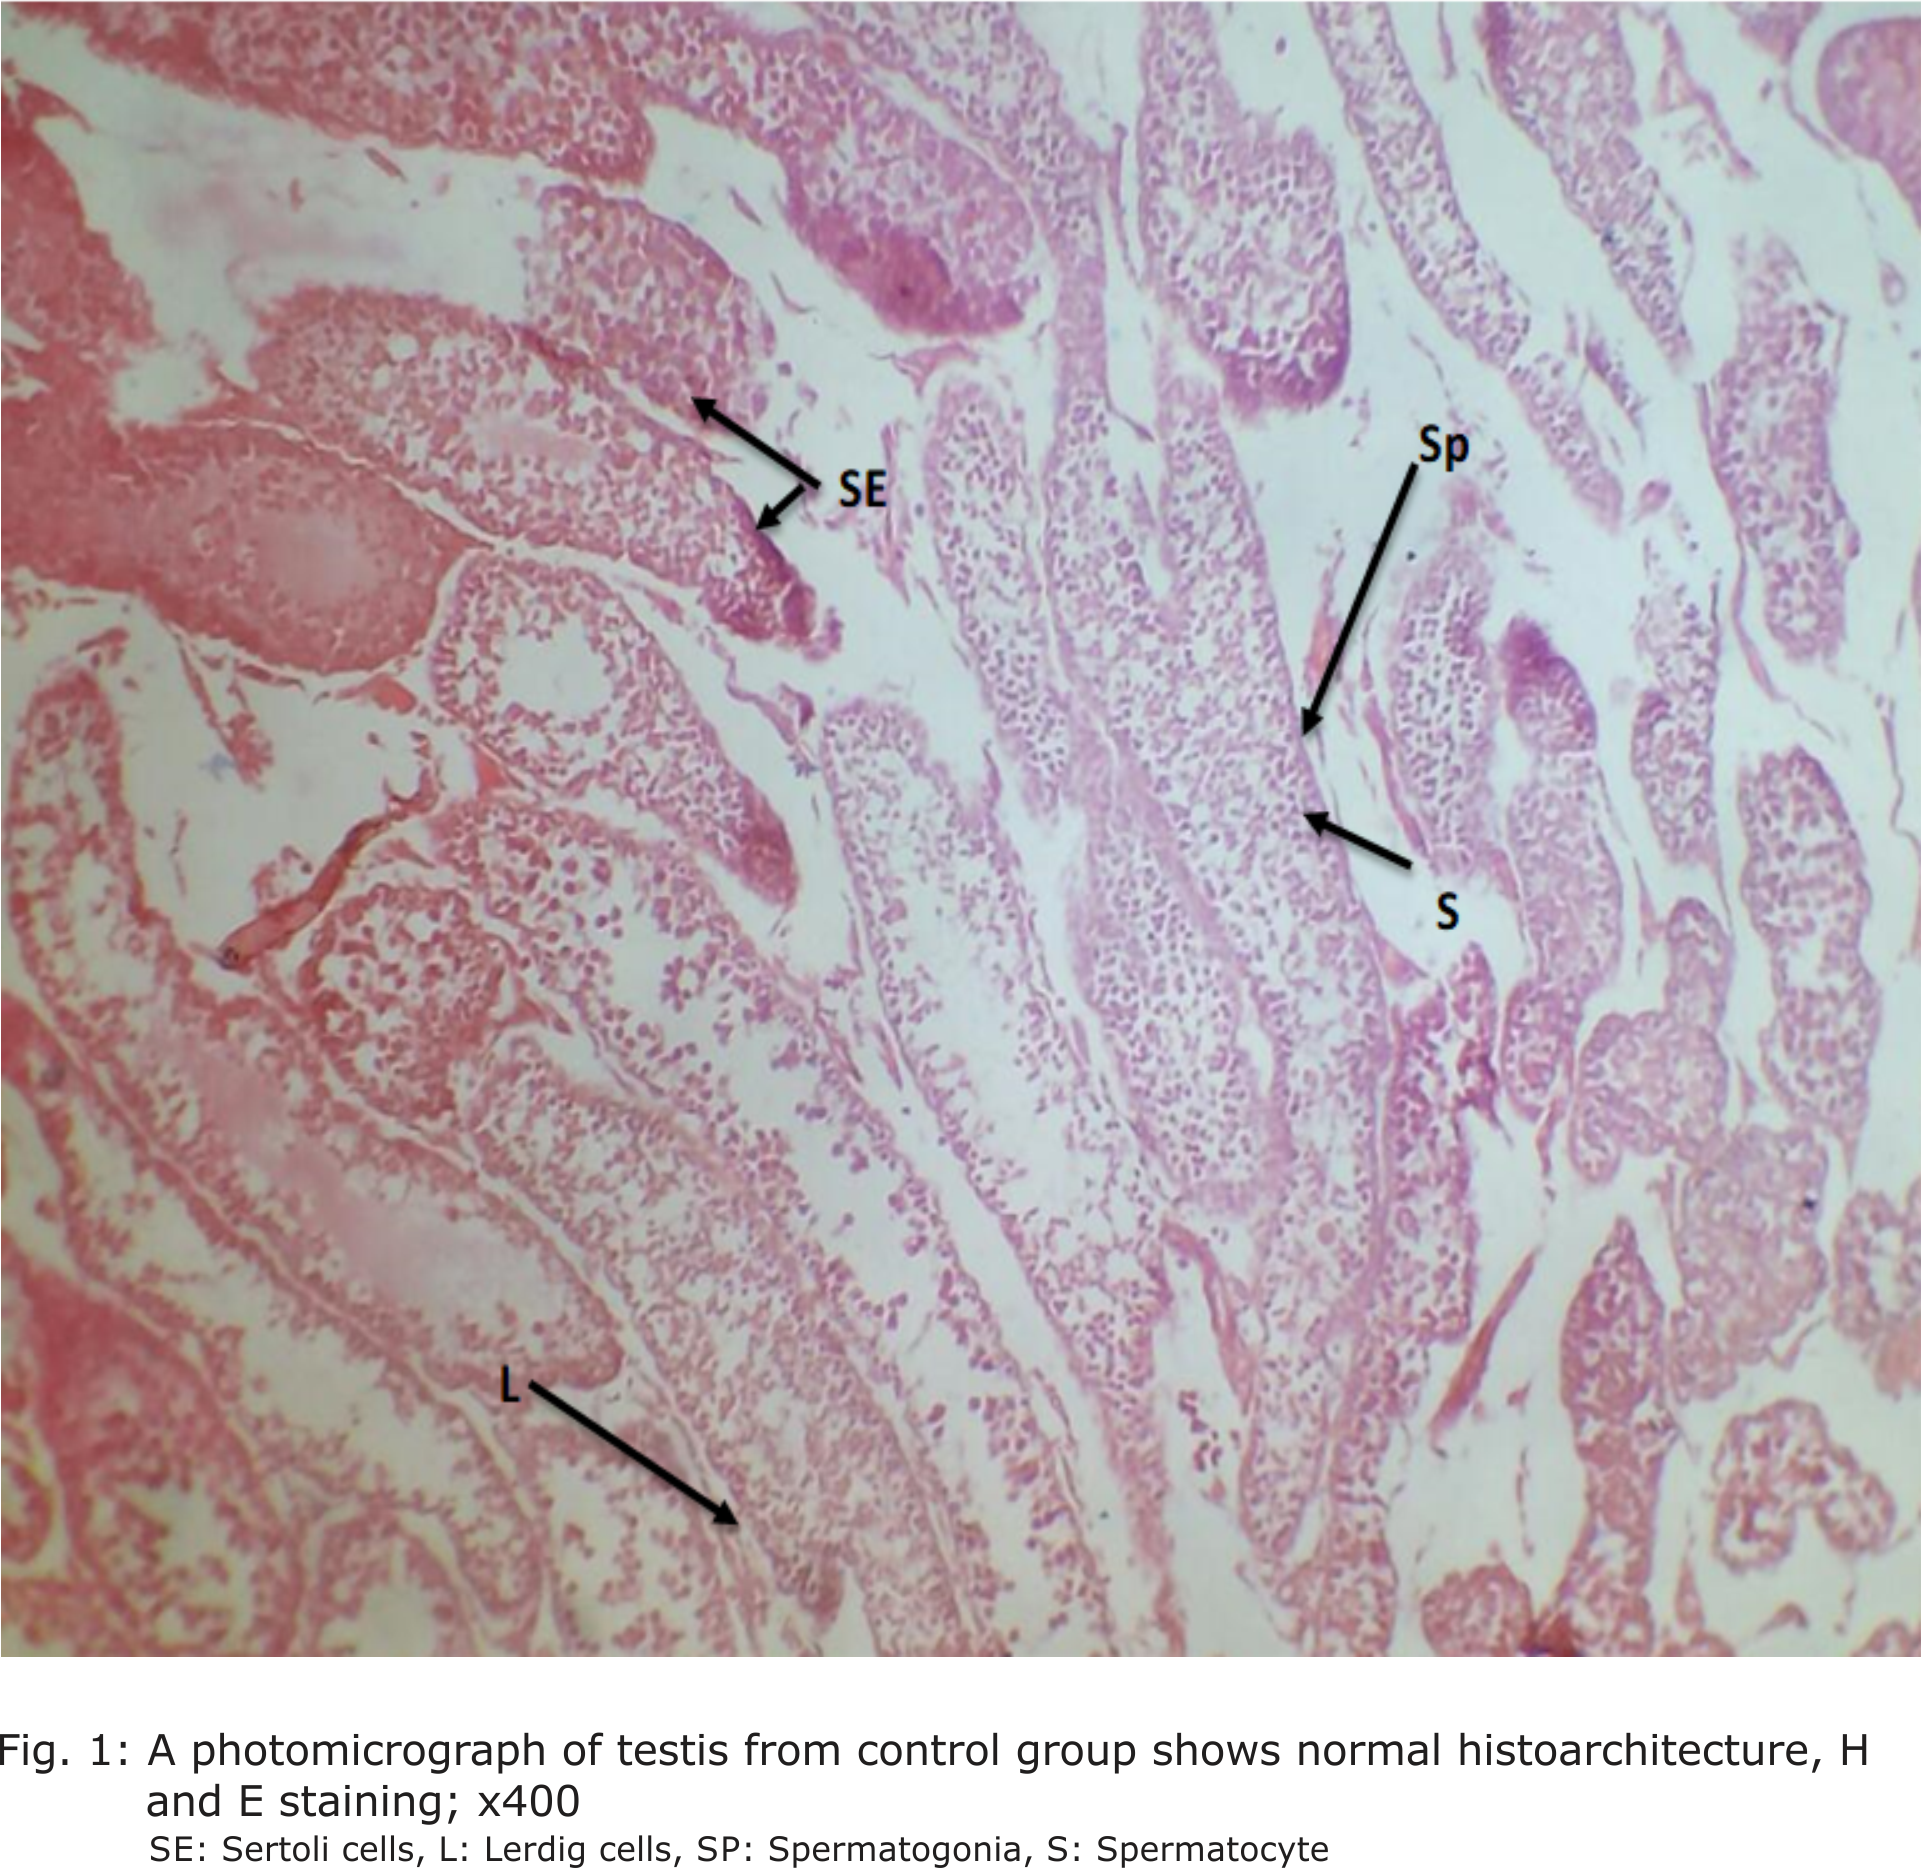 Fig. 1: A photomicrograph of testis from control group shows normal histoarchitecture, H and E staining; x400. SE: Sertoli cells, L: Lerdig cells, SP: Spermatogonia, S: Spermatocyte